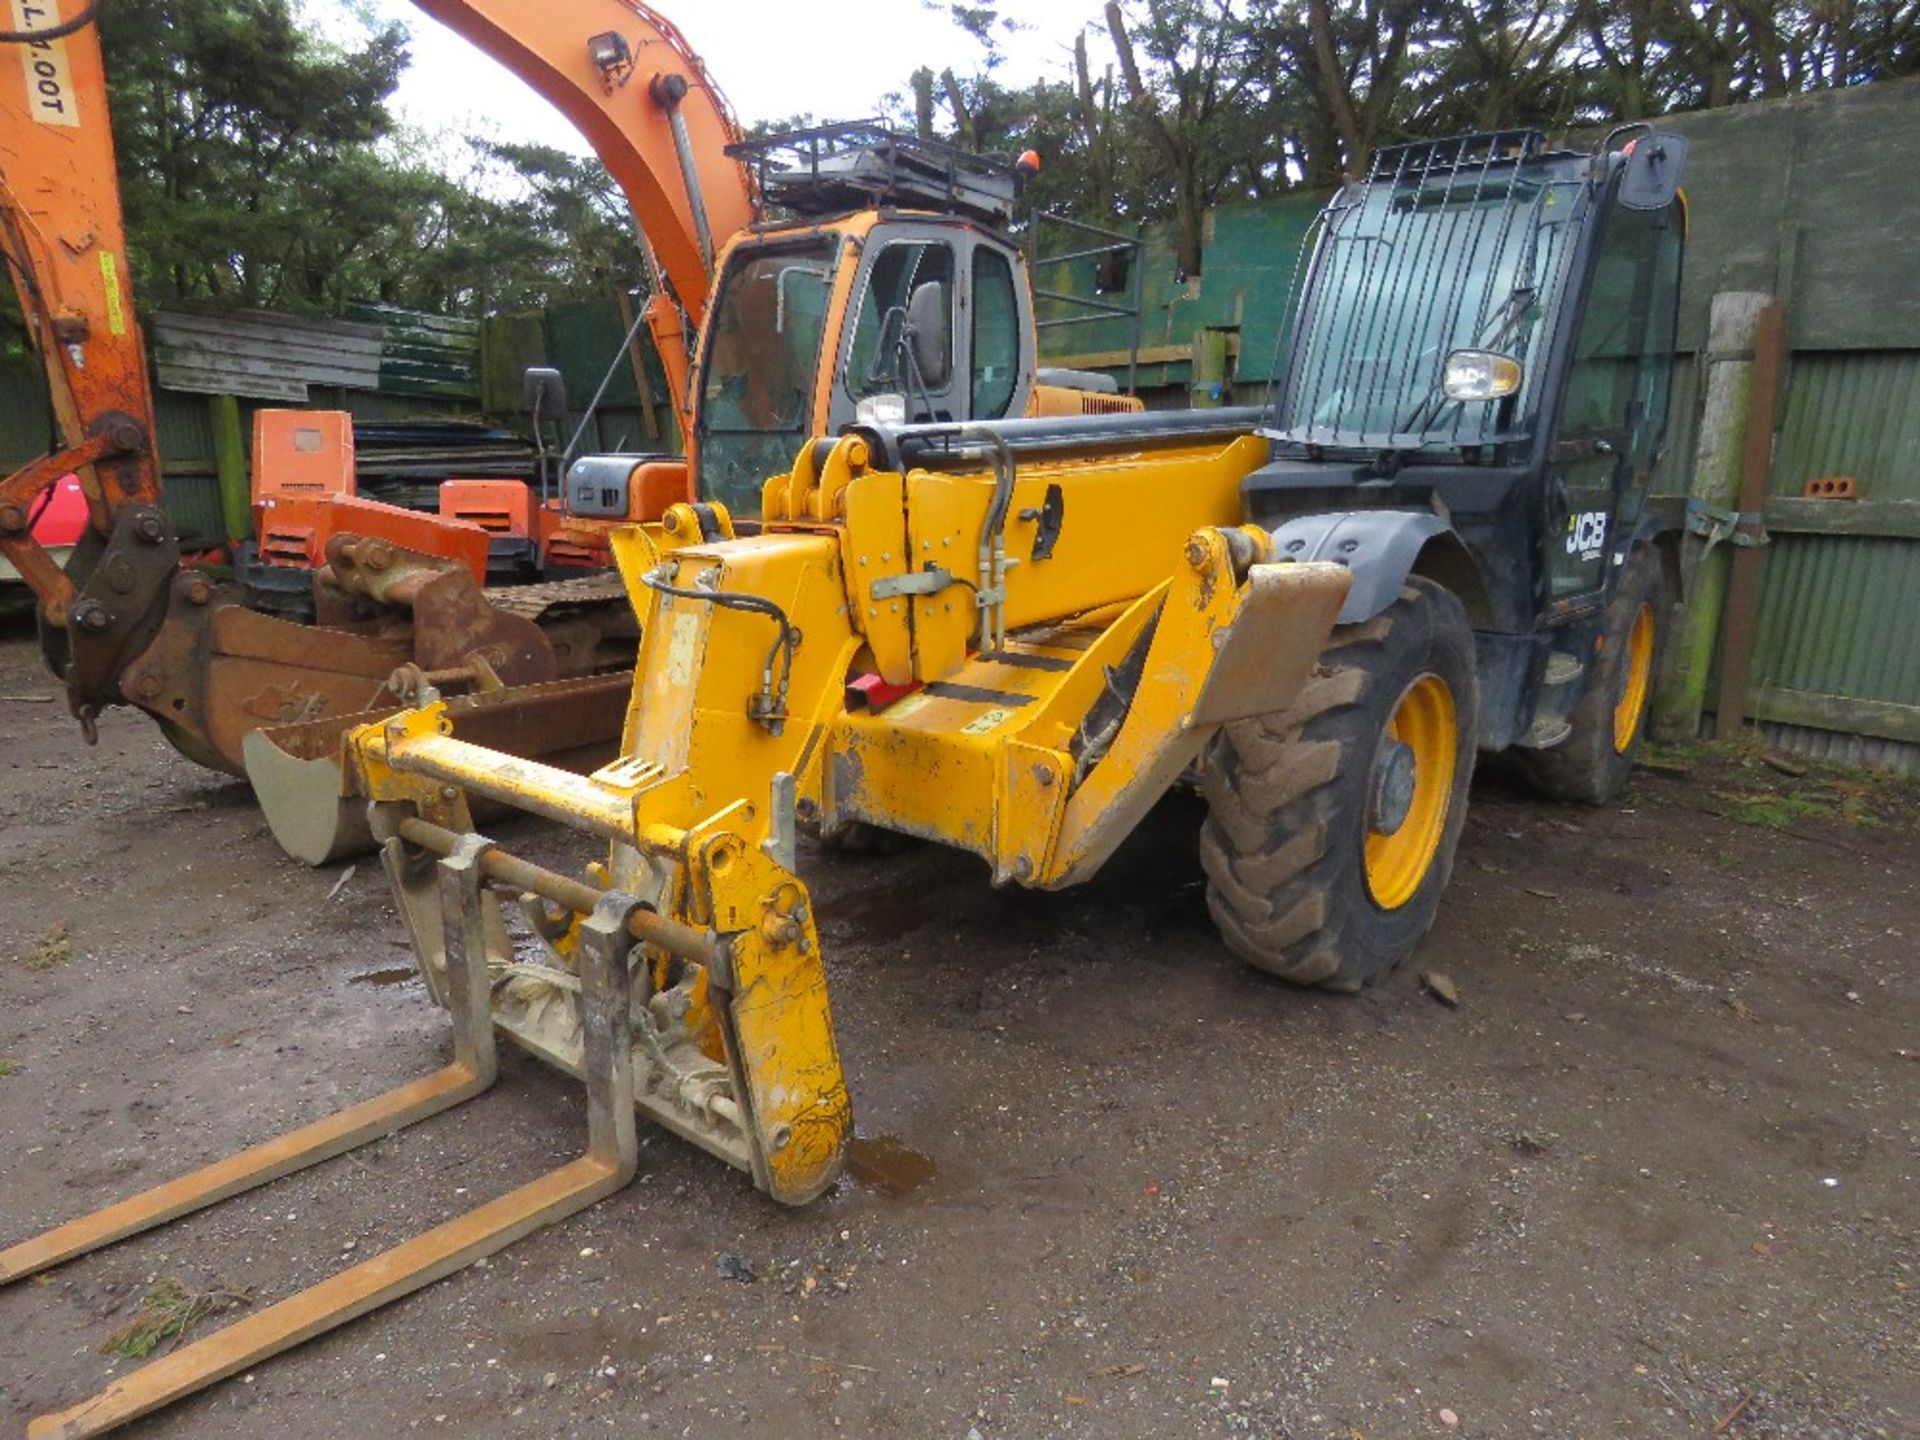 JCB 540-140 TELEHANDLER REG:RV17 YGT WITH V5. 14METRE REACH, 4 TONNE LIFT OWNED FROM NEW BY THE COMP - Image 3 of 23